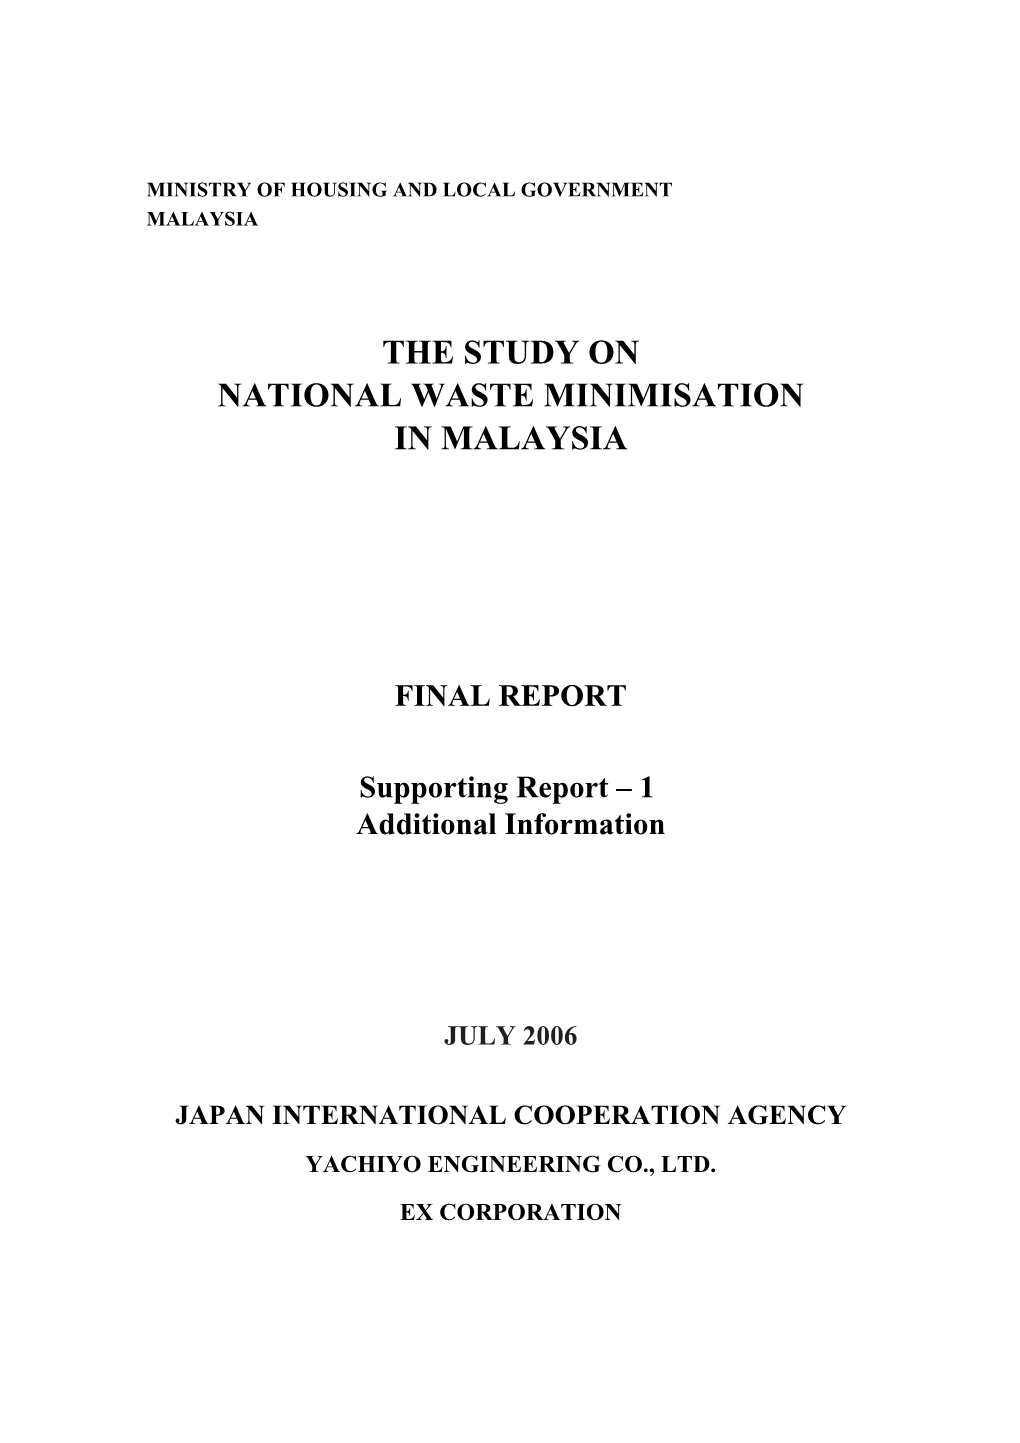 The Study on National Waste Minimisation in Malaysia